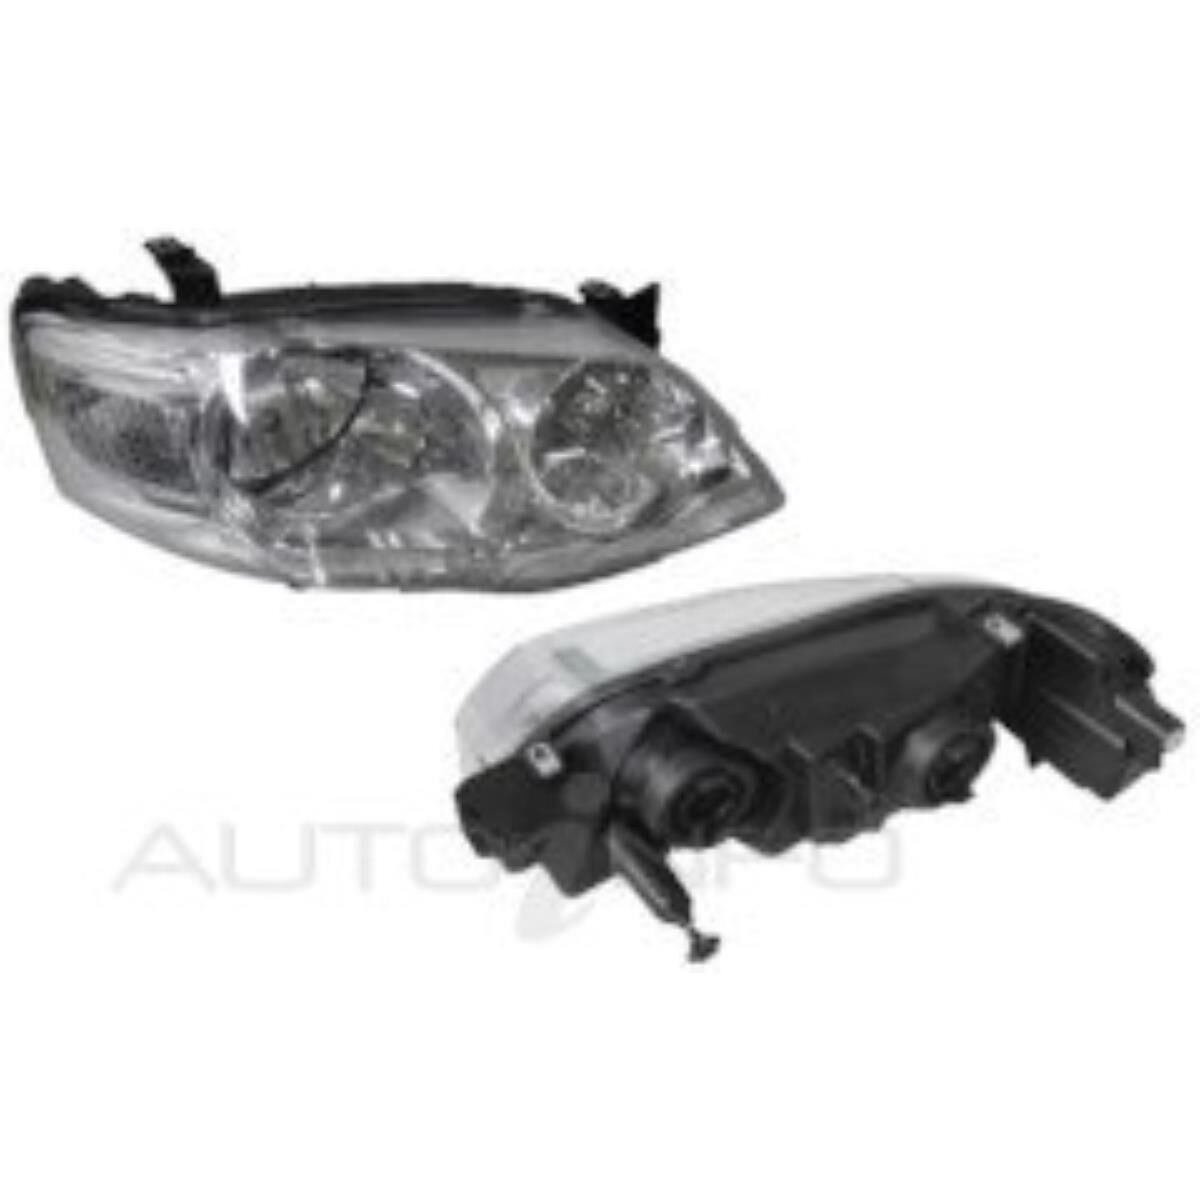 FORD FALCON  BF SERIES 2 & 3  09/2006 ~ 02/2008  HEADLIGHT  RIGHT HAND SIDE  CHROME, , scaau_hi-res